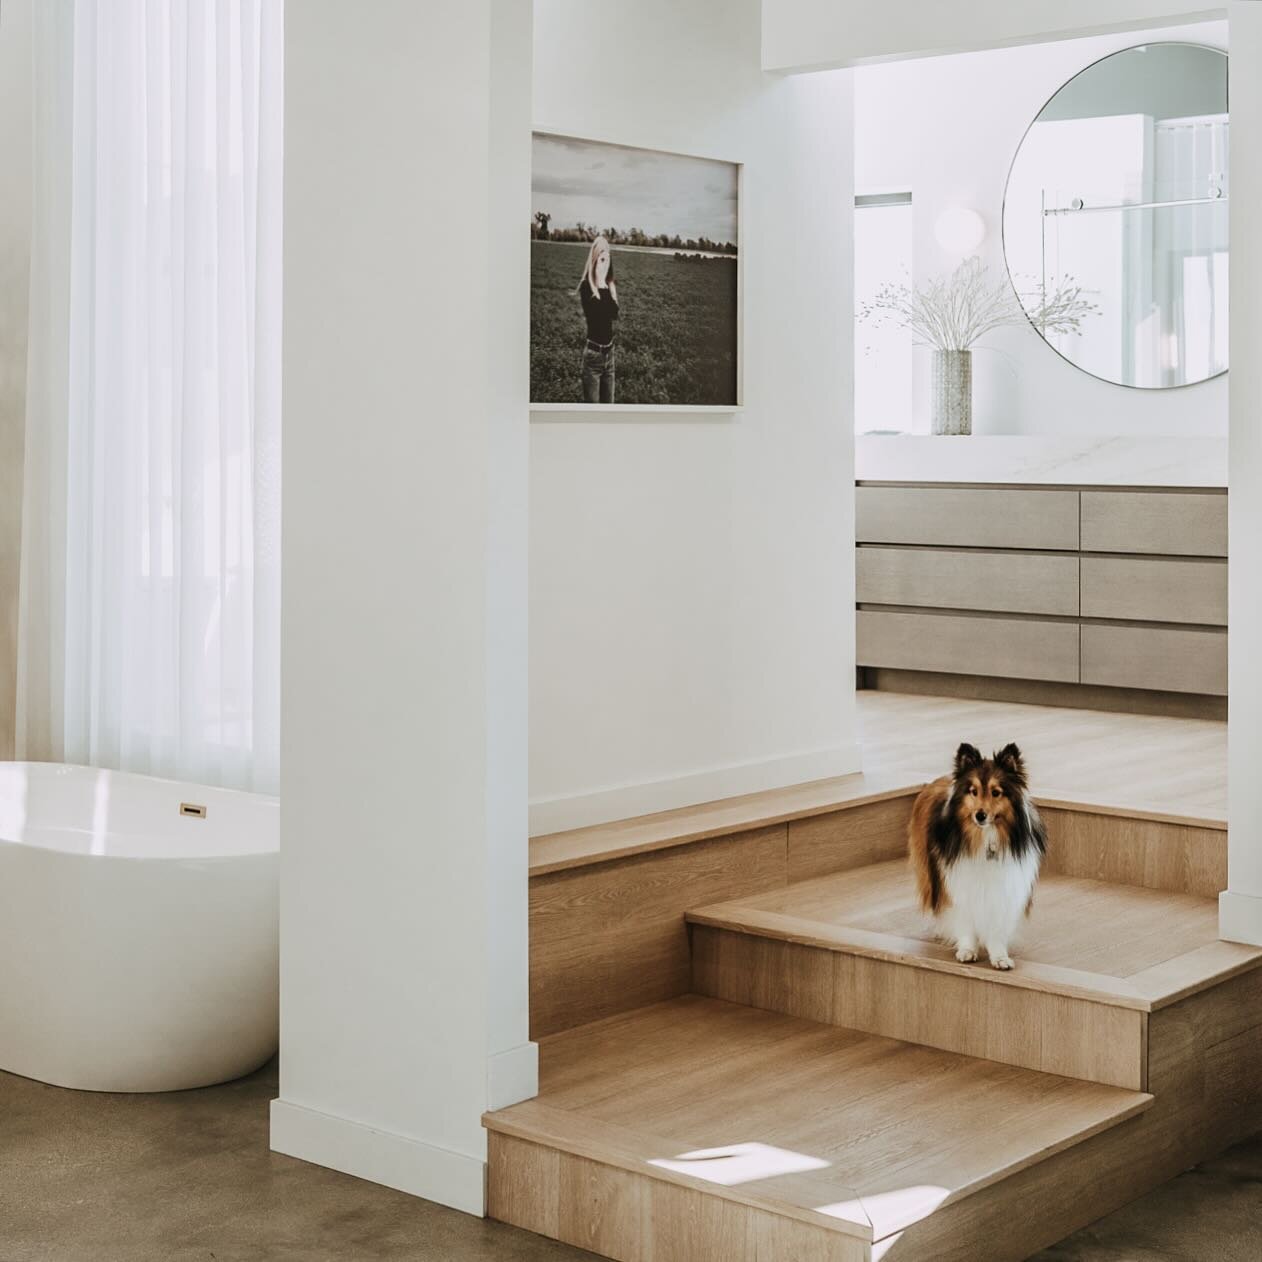 Our place .. for when you need some inspiration and some friendly faces, for projects big or small, our knowledgeable team is here to see you through. 

See our stories for more on one of our most admired bathroom vanities (as shown behind our showro